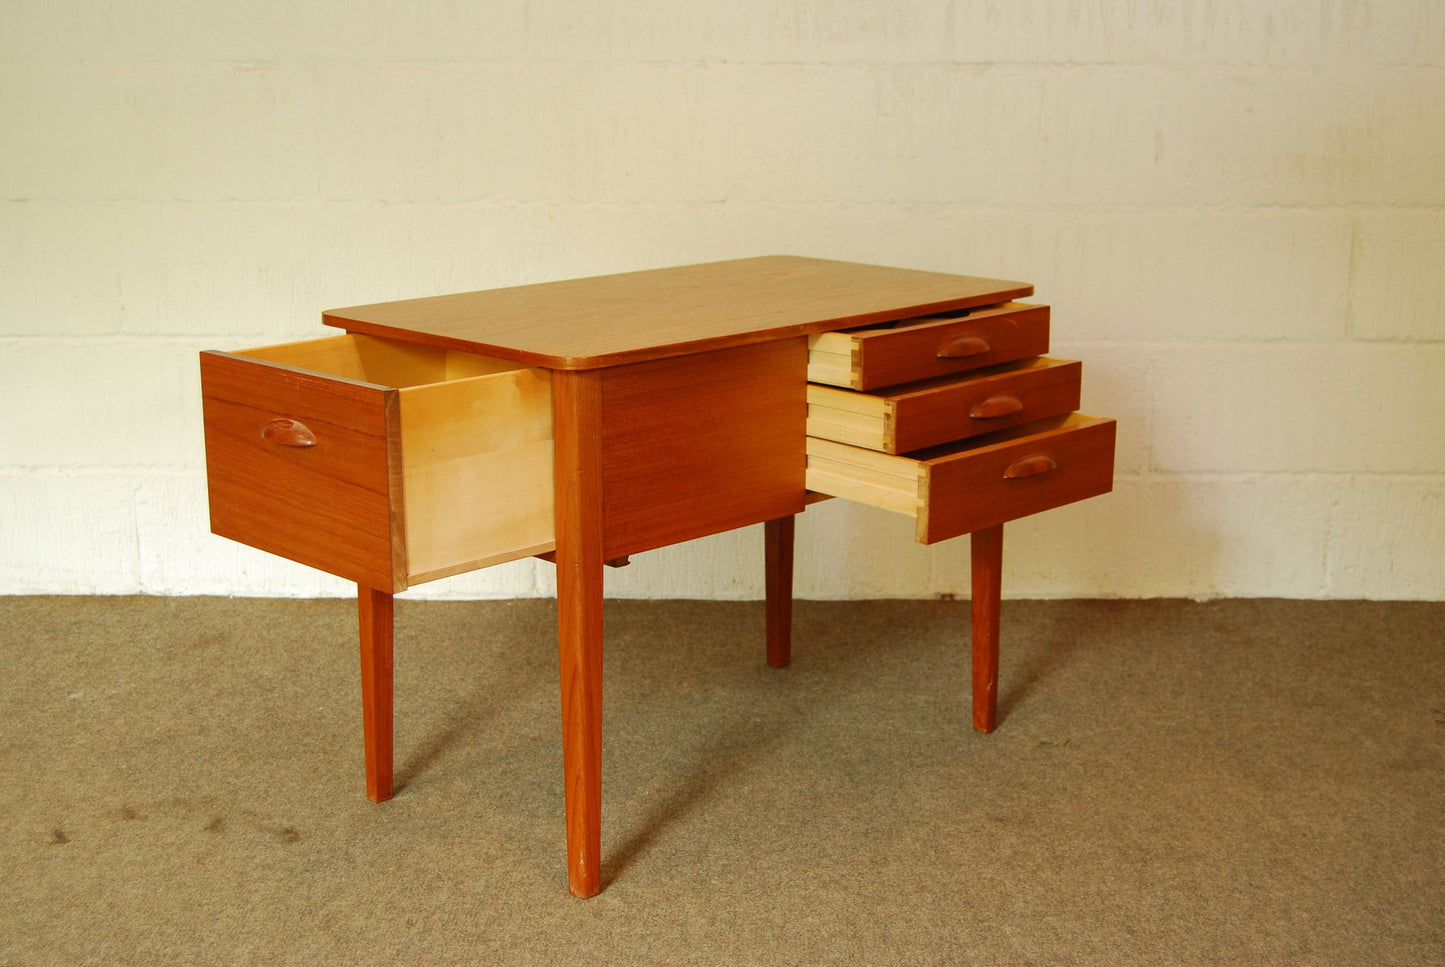 Birch-lined teak sewing table